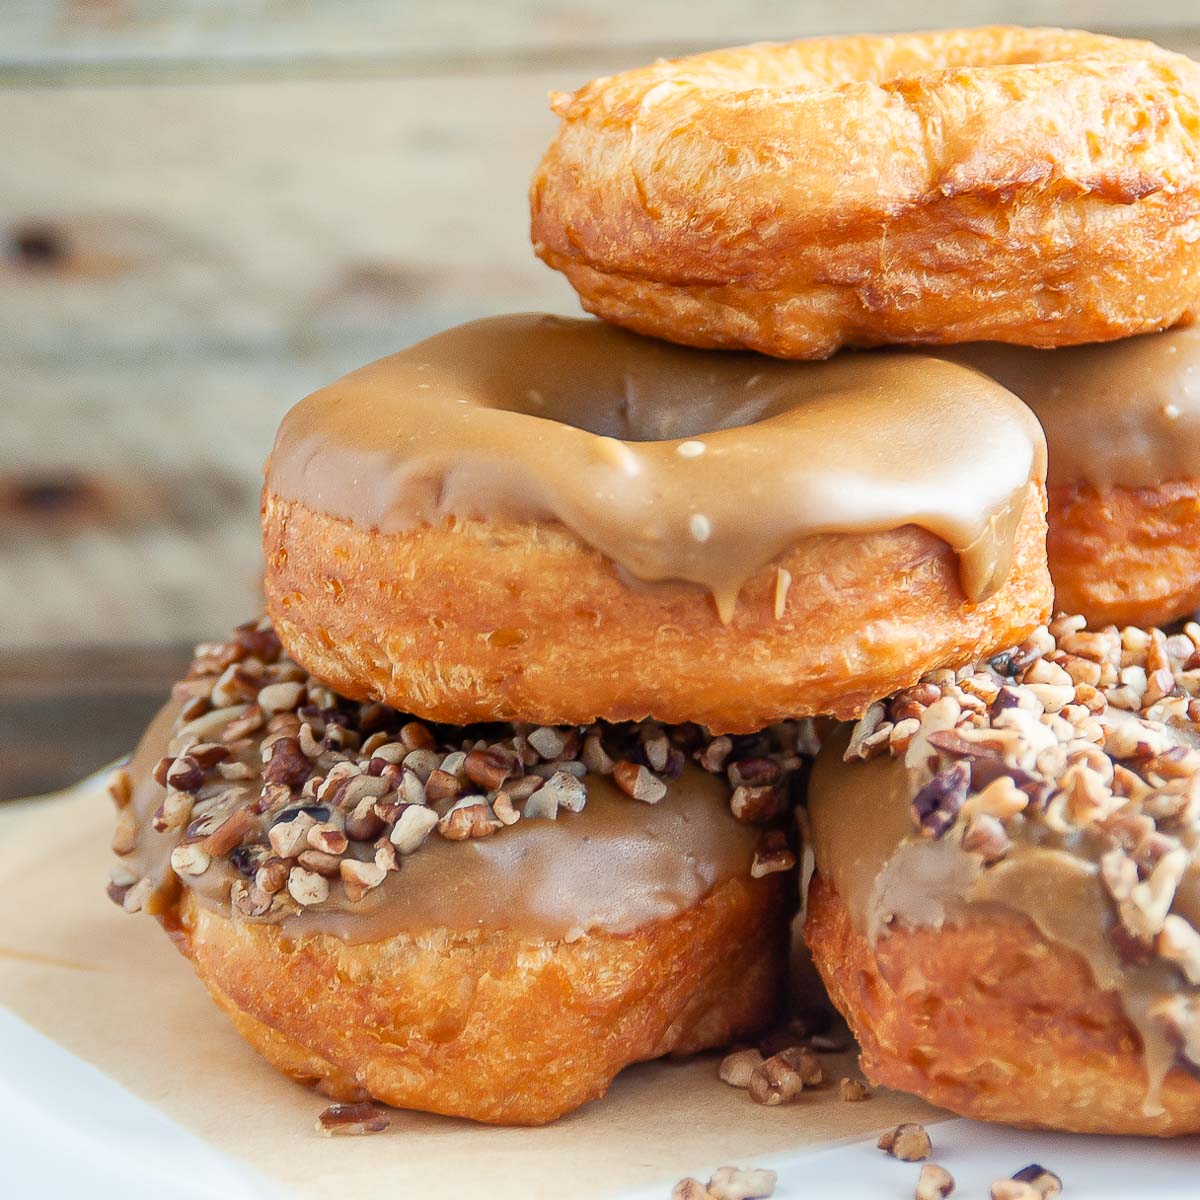 Stack of caramel donuts made from canned biscuits